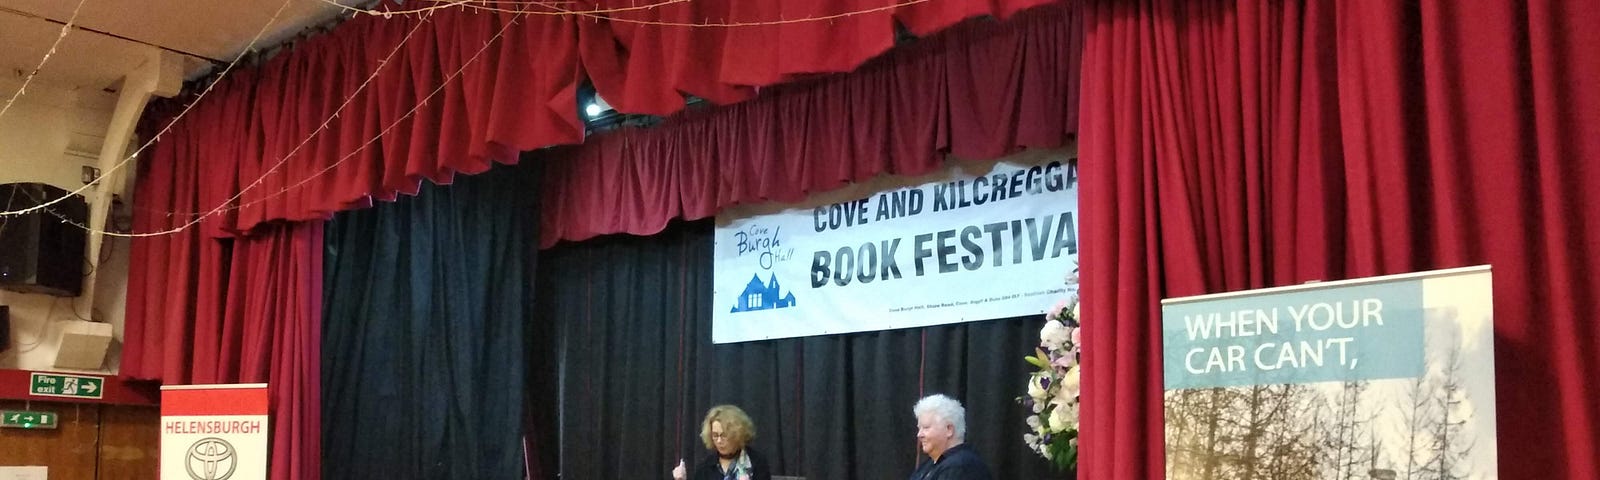 A book festival event in Cove Burgh hall pre-pandemic, featuring Val McDermid